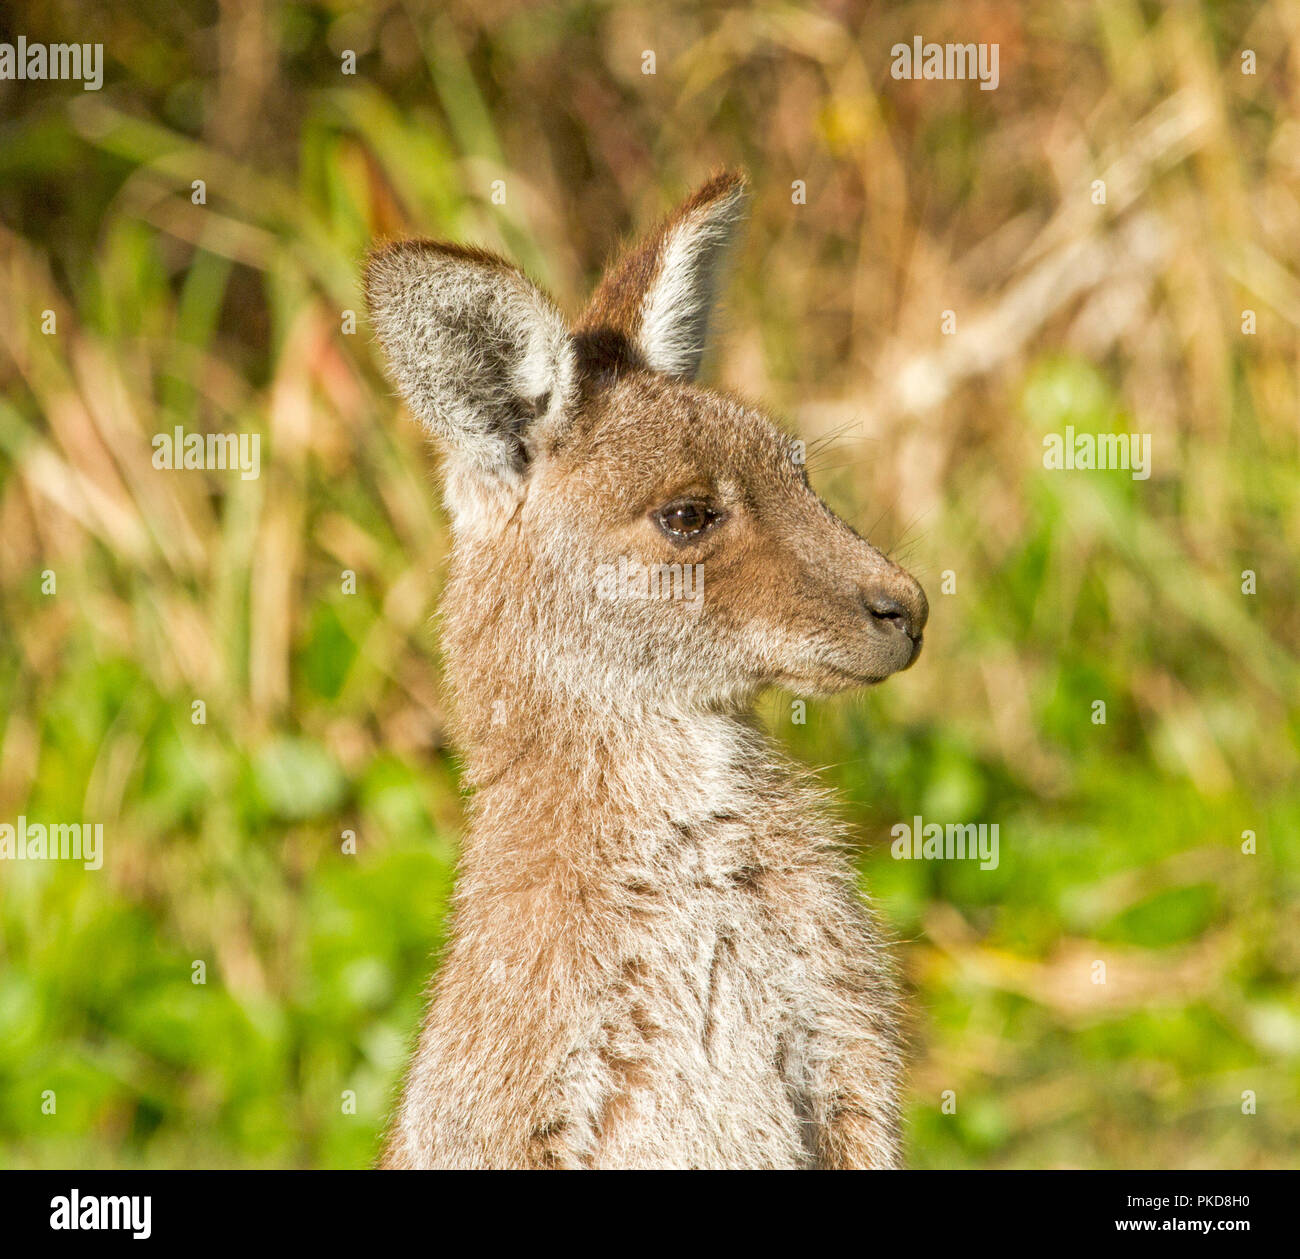 Close-up of face of young eastern grey kangaroo against background of green foliage at Crowdy Bay National Park NSW Stock Photo